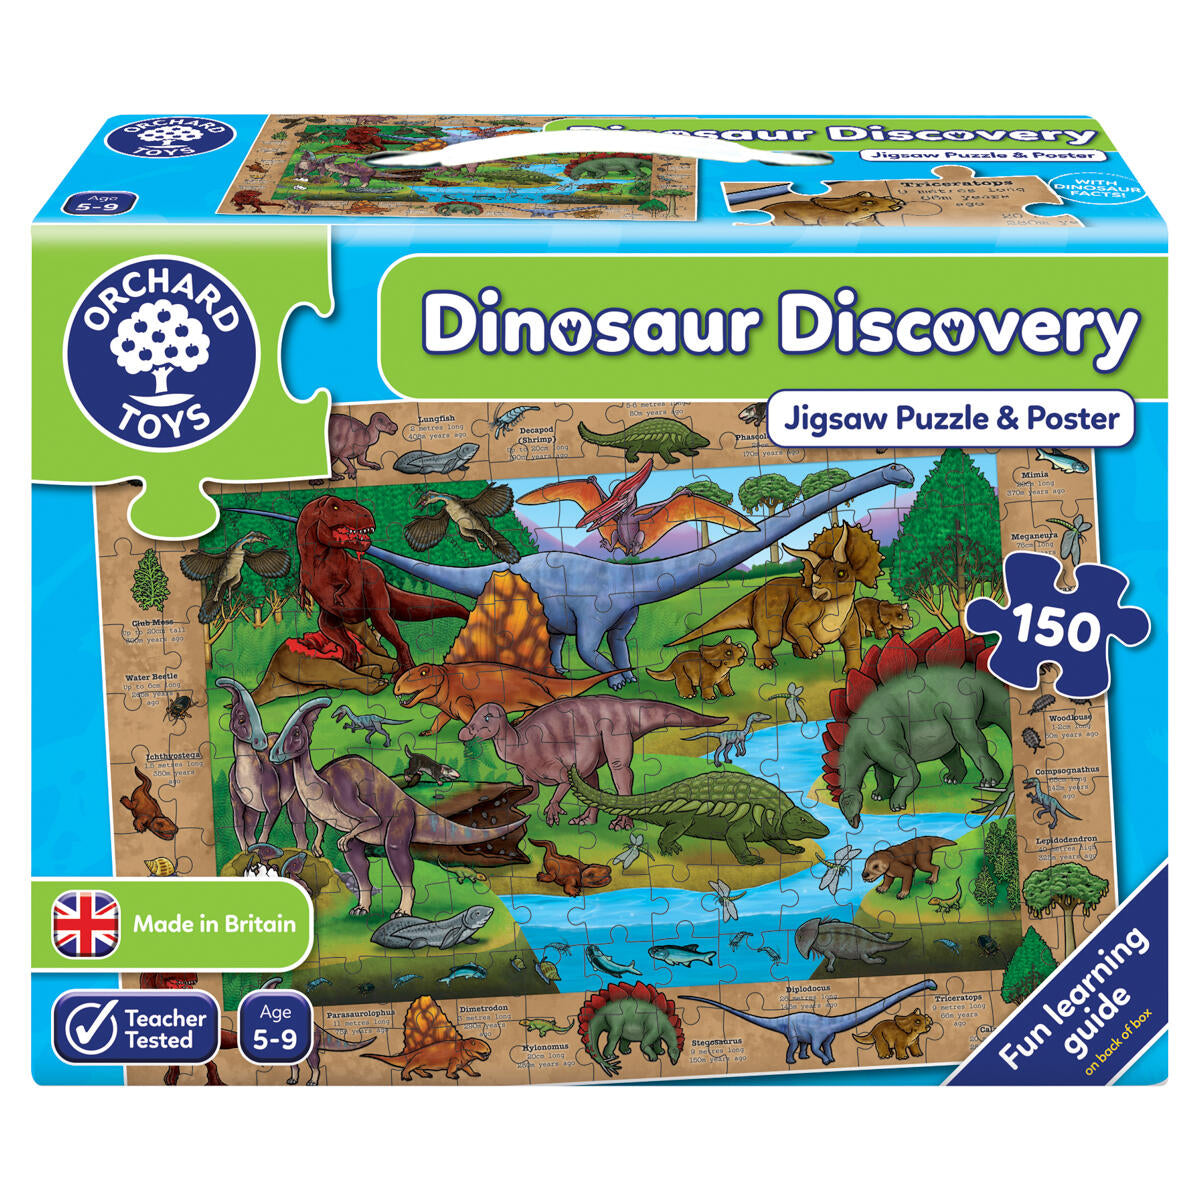 View the best prices for: orchard toys dinosaur discovery jigsaw puzzle & poster 150 piece